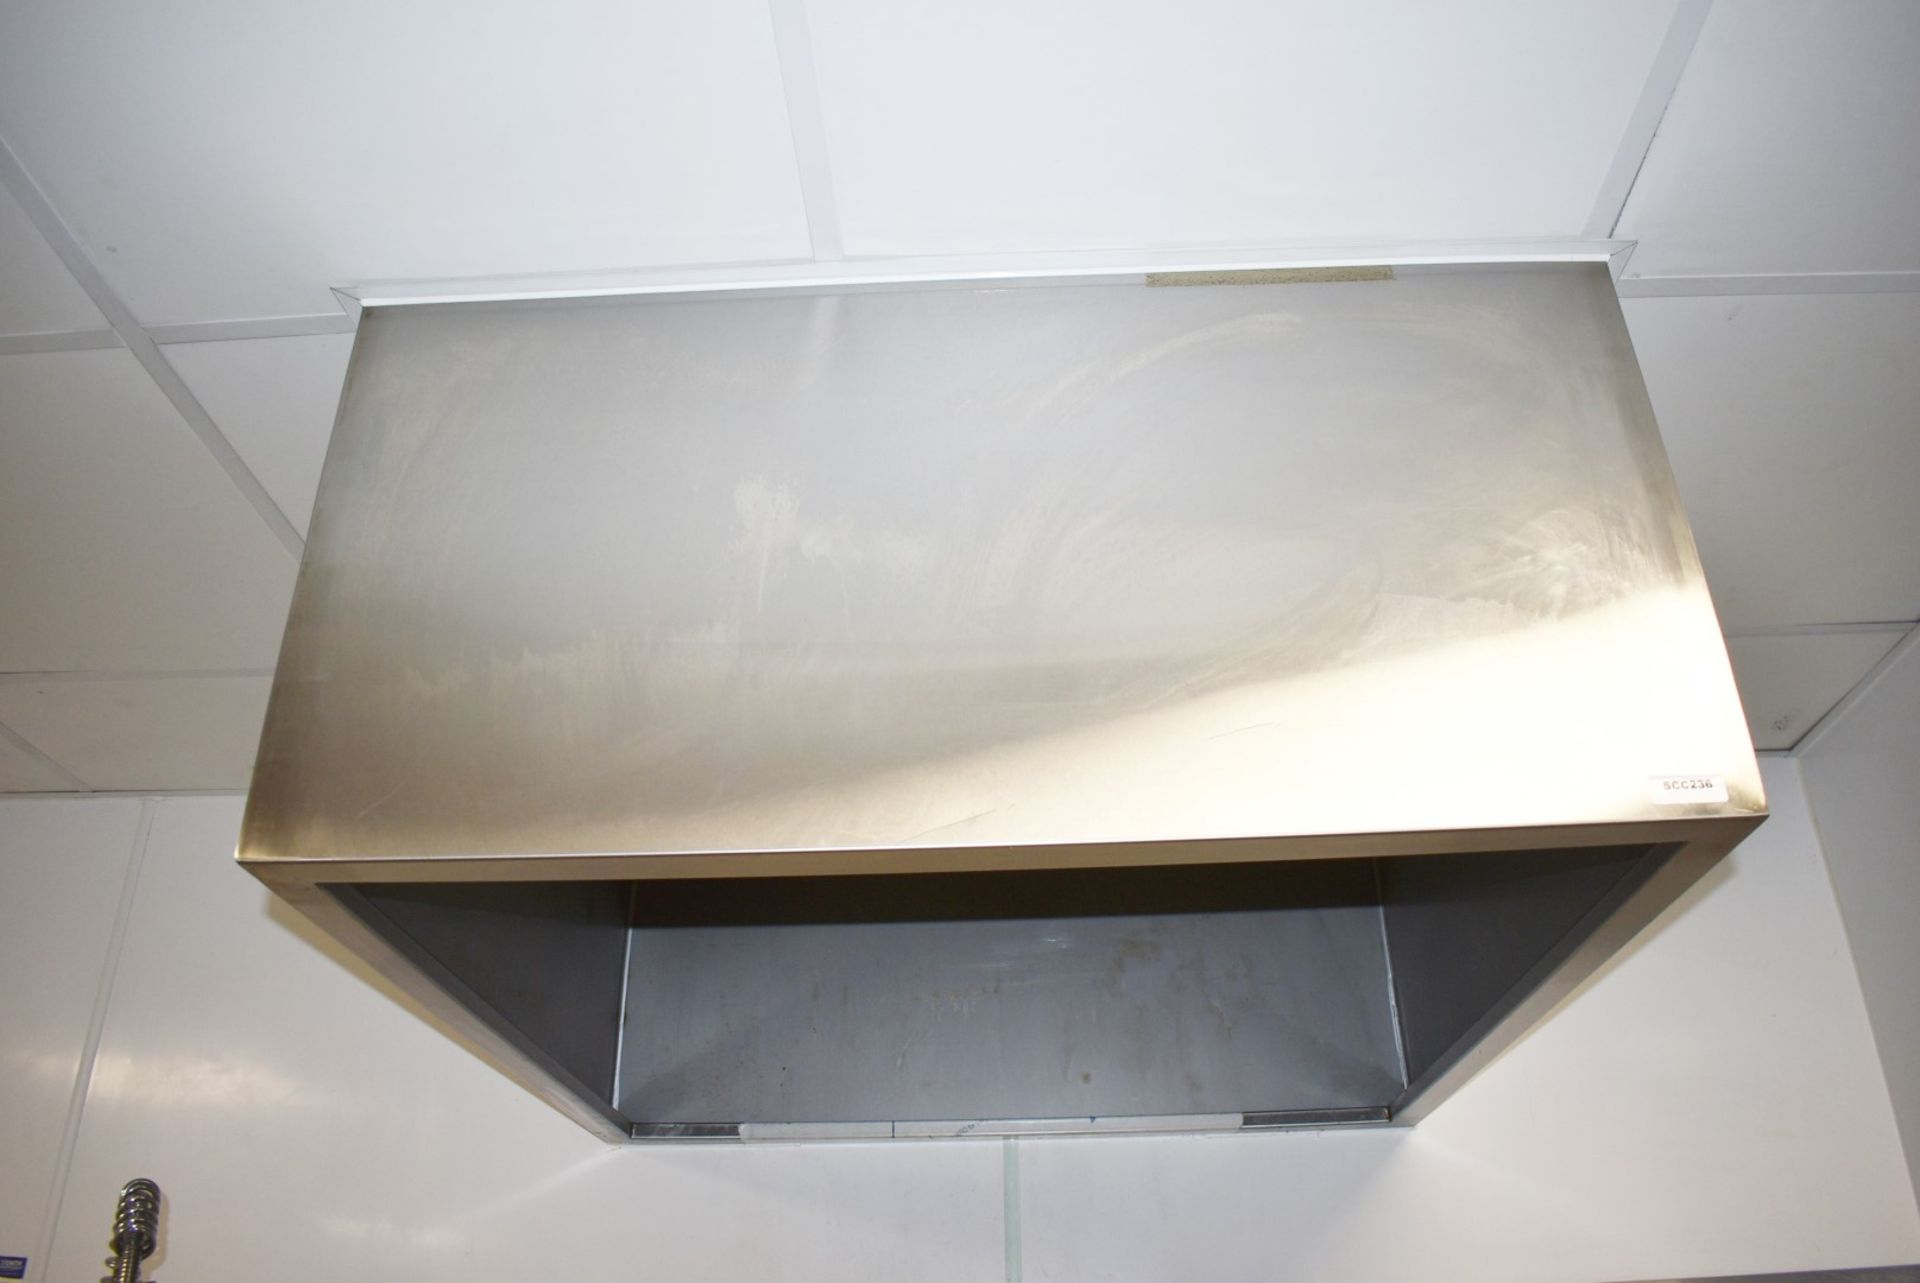 1 x Stainless Steel Extraction Canopy For Passthrough Dishwashers - Size: H48 x W100 x D100 cms - Image 2 of 4